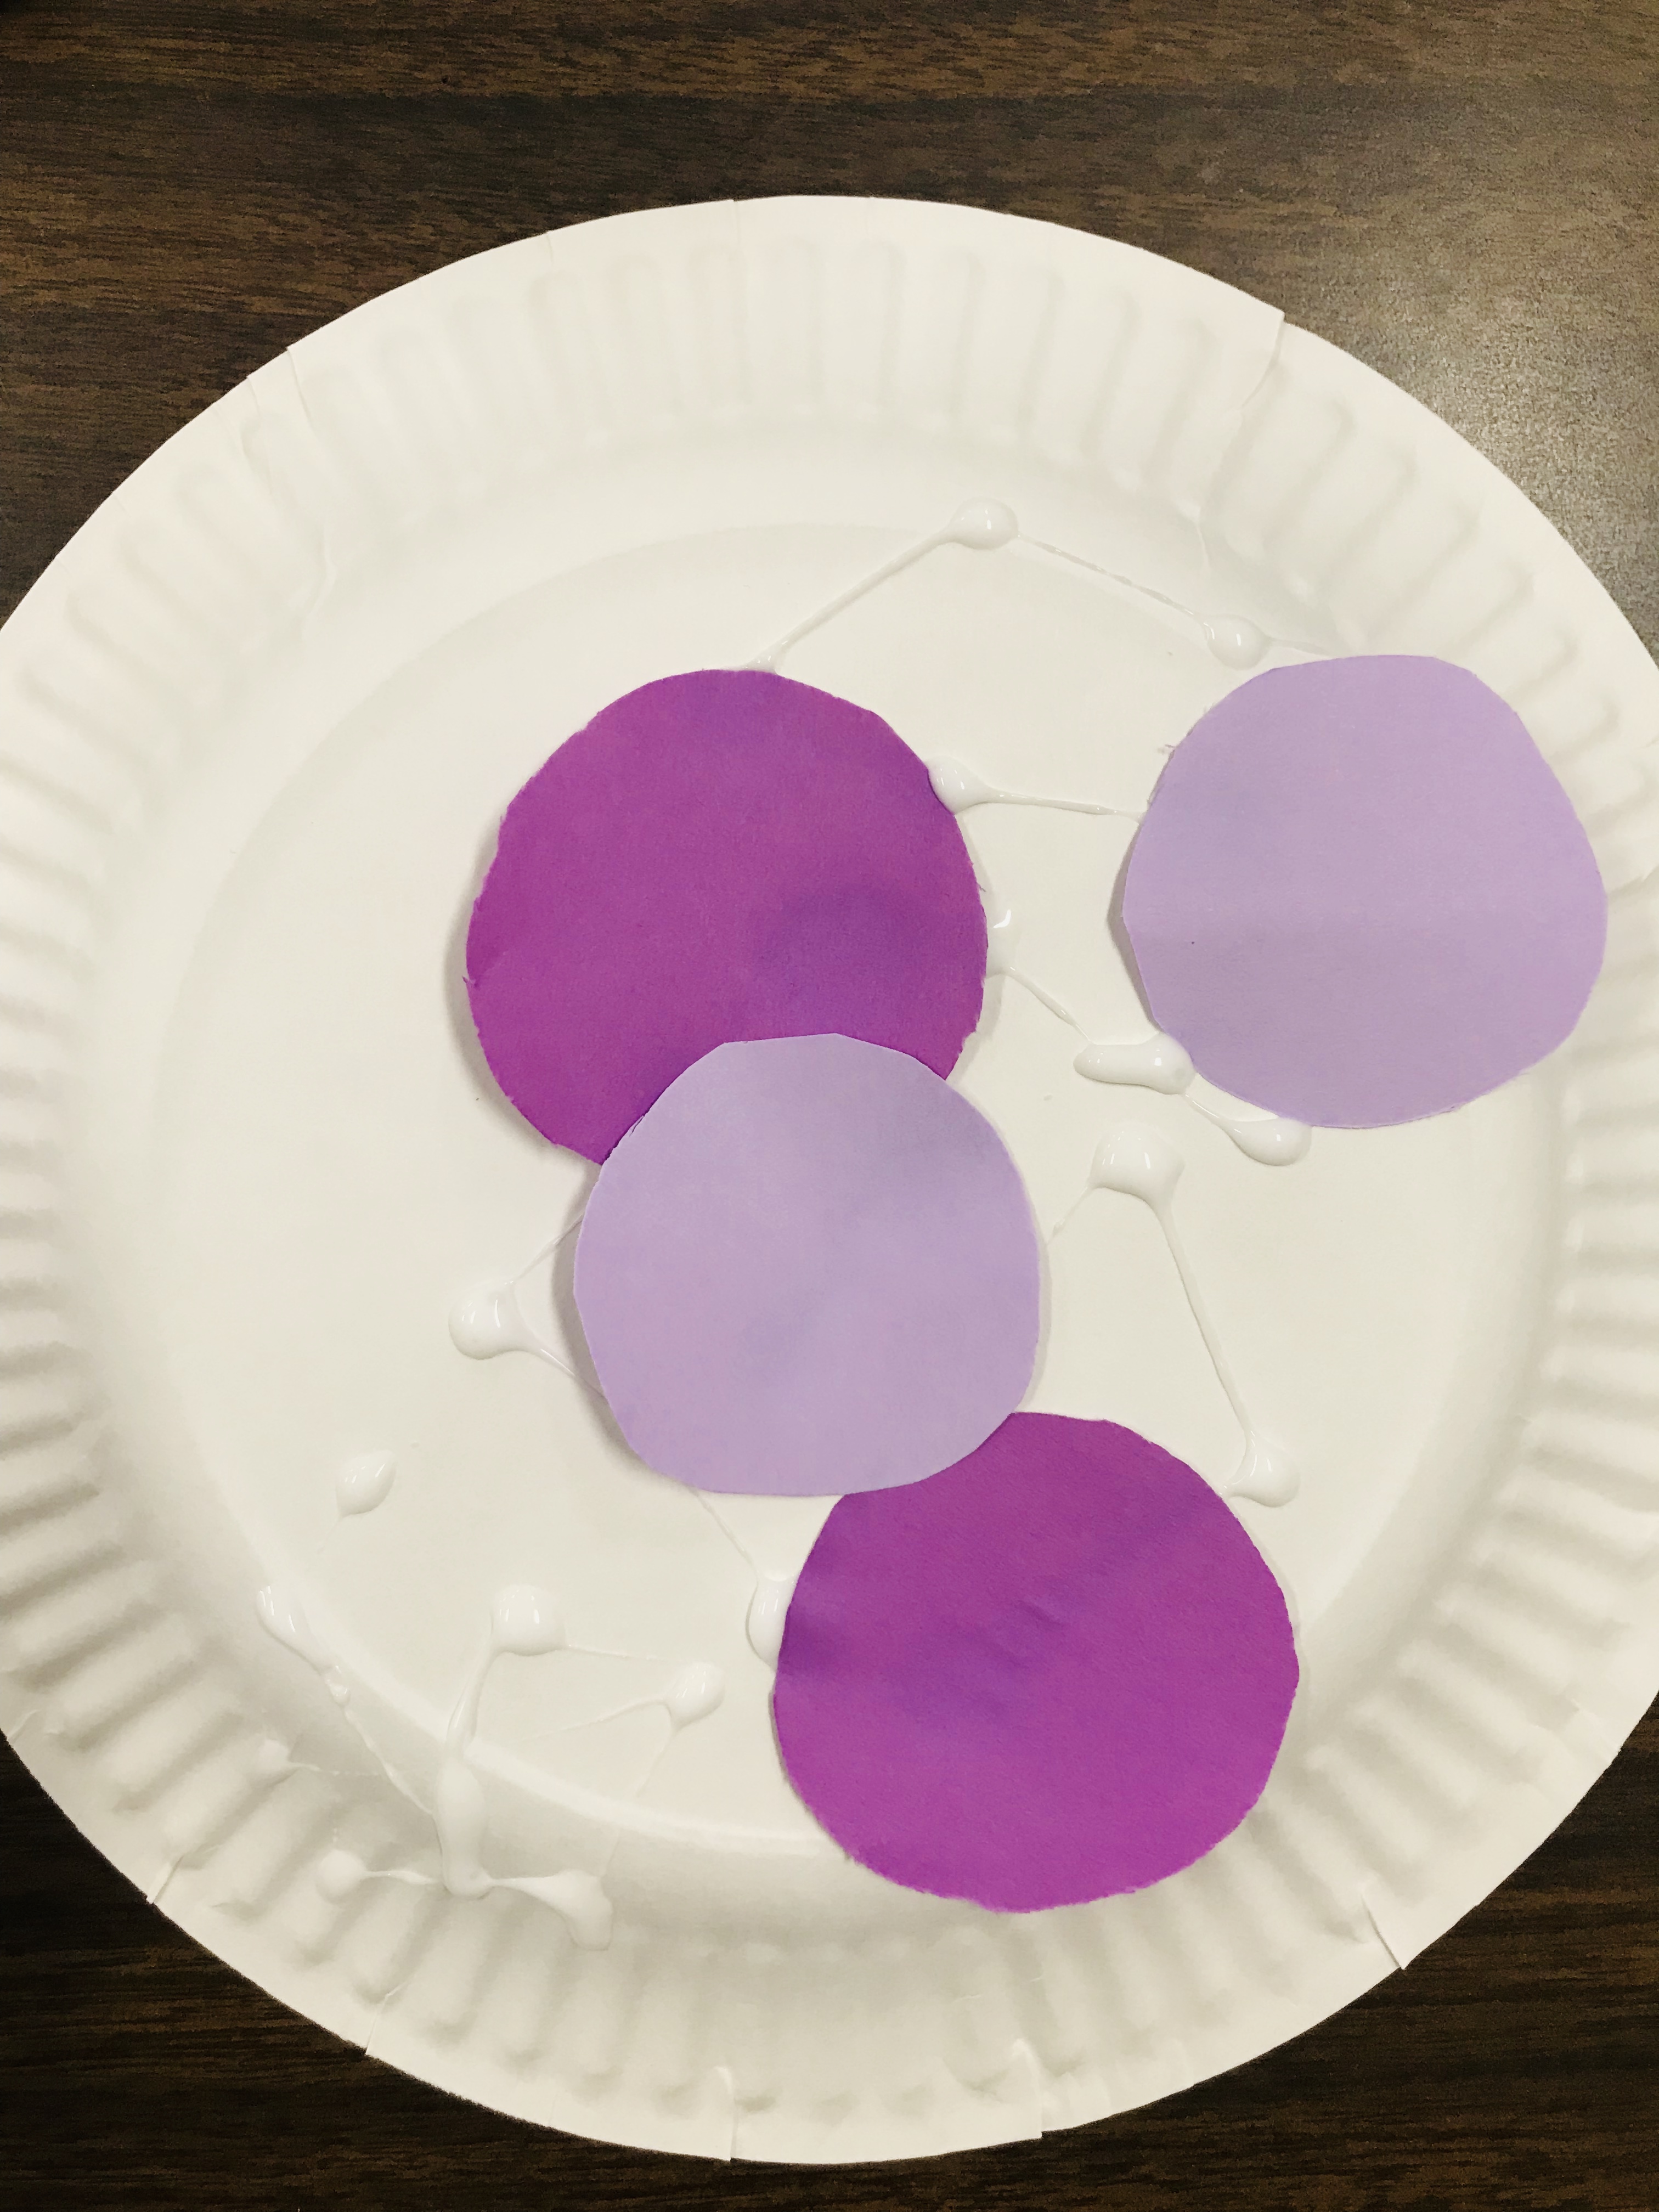 Gluing purple circles on paper plate